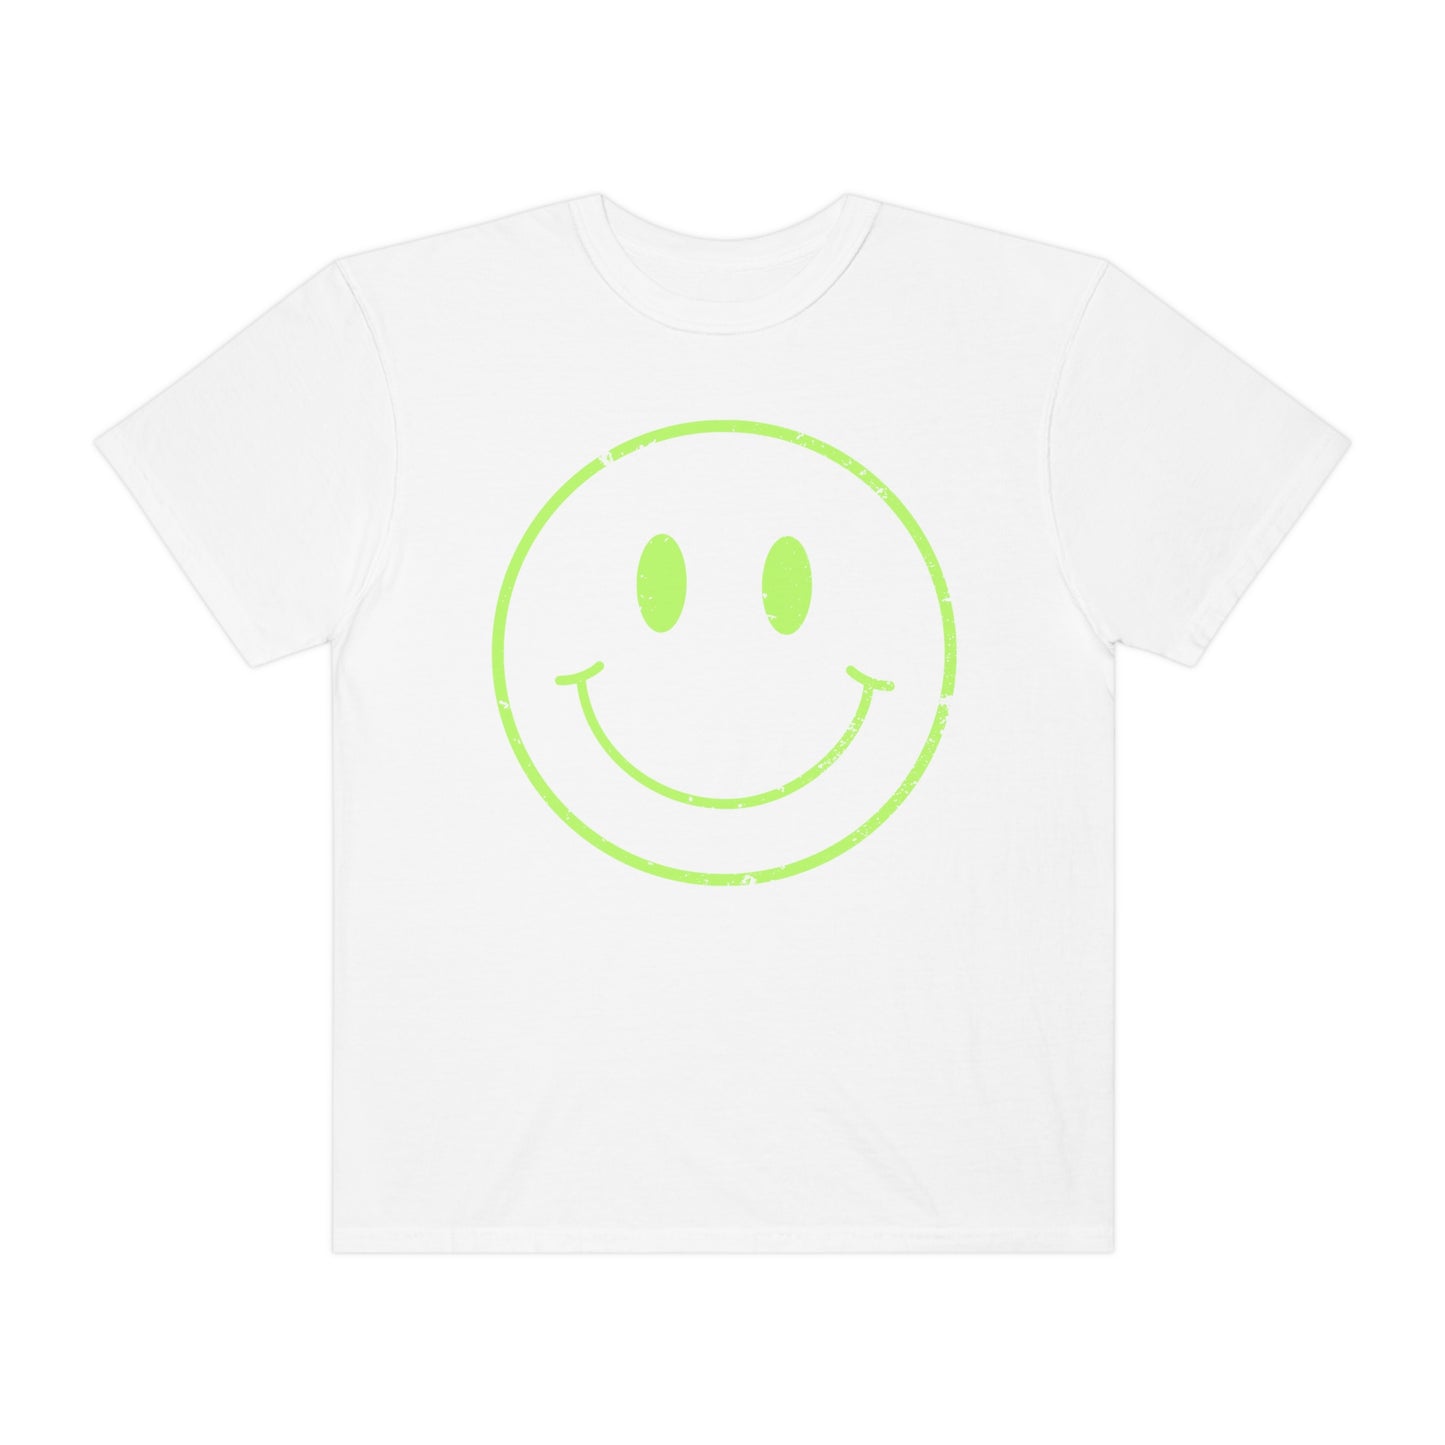 Distressed Neon Smiley Face Tee, Be Happy Shirt, Large Smiley Face Shirt, Trendy Retro Shirt for Women or Men, Gift for Women, Gift for Teen